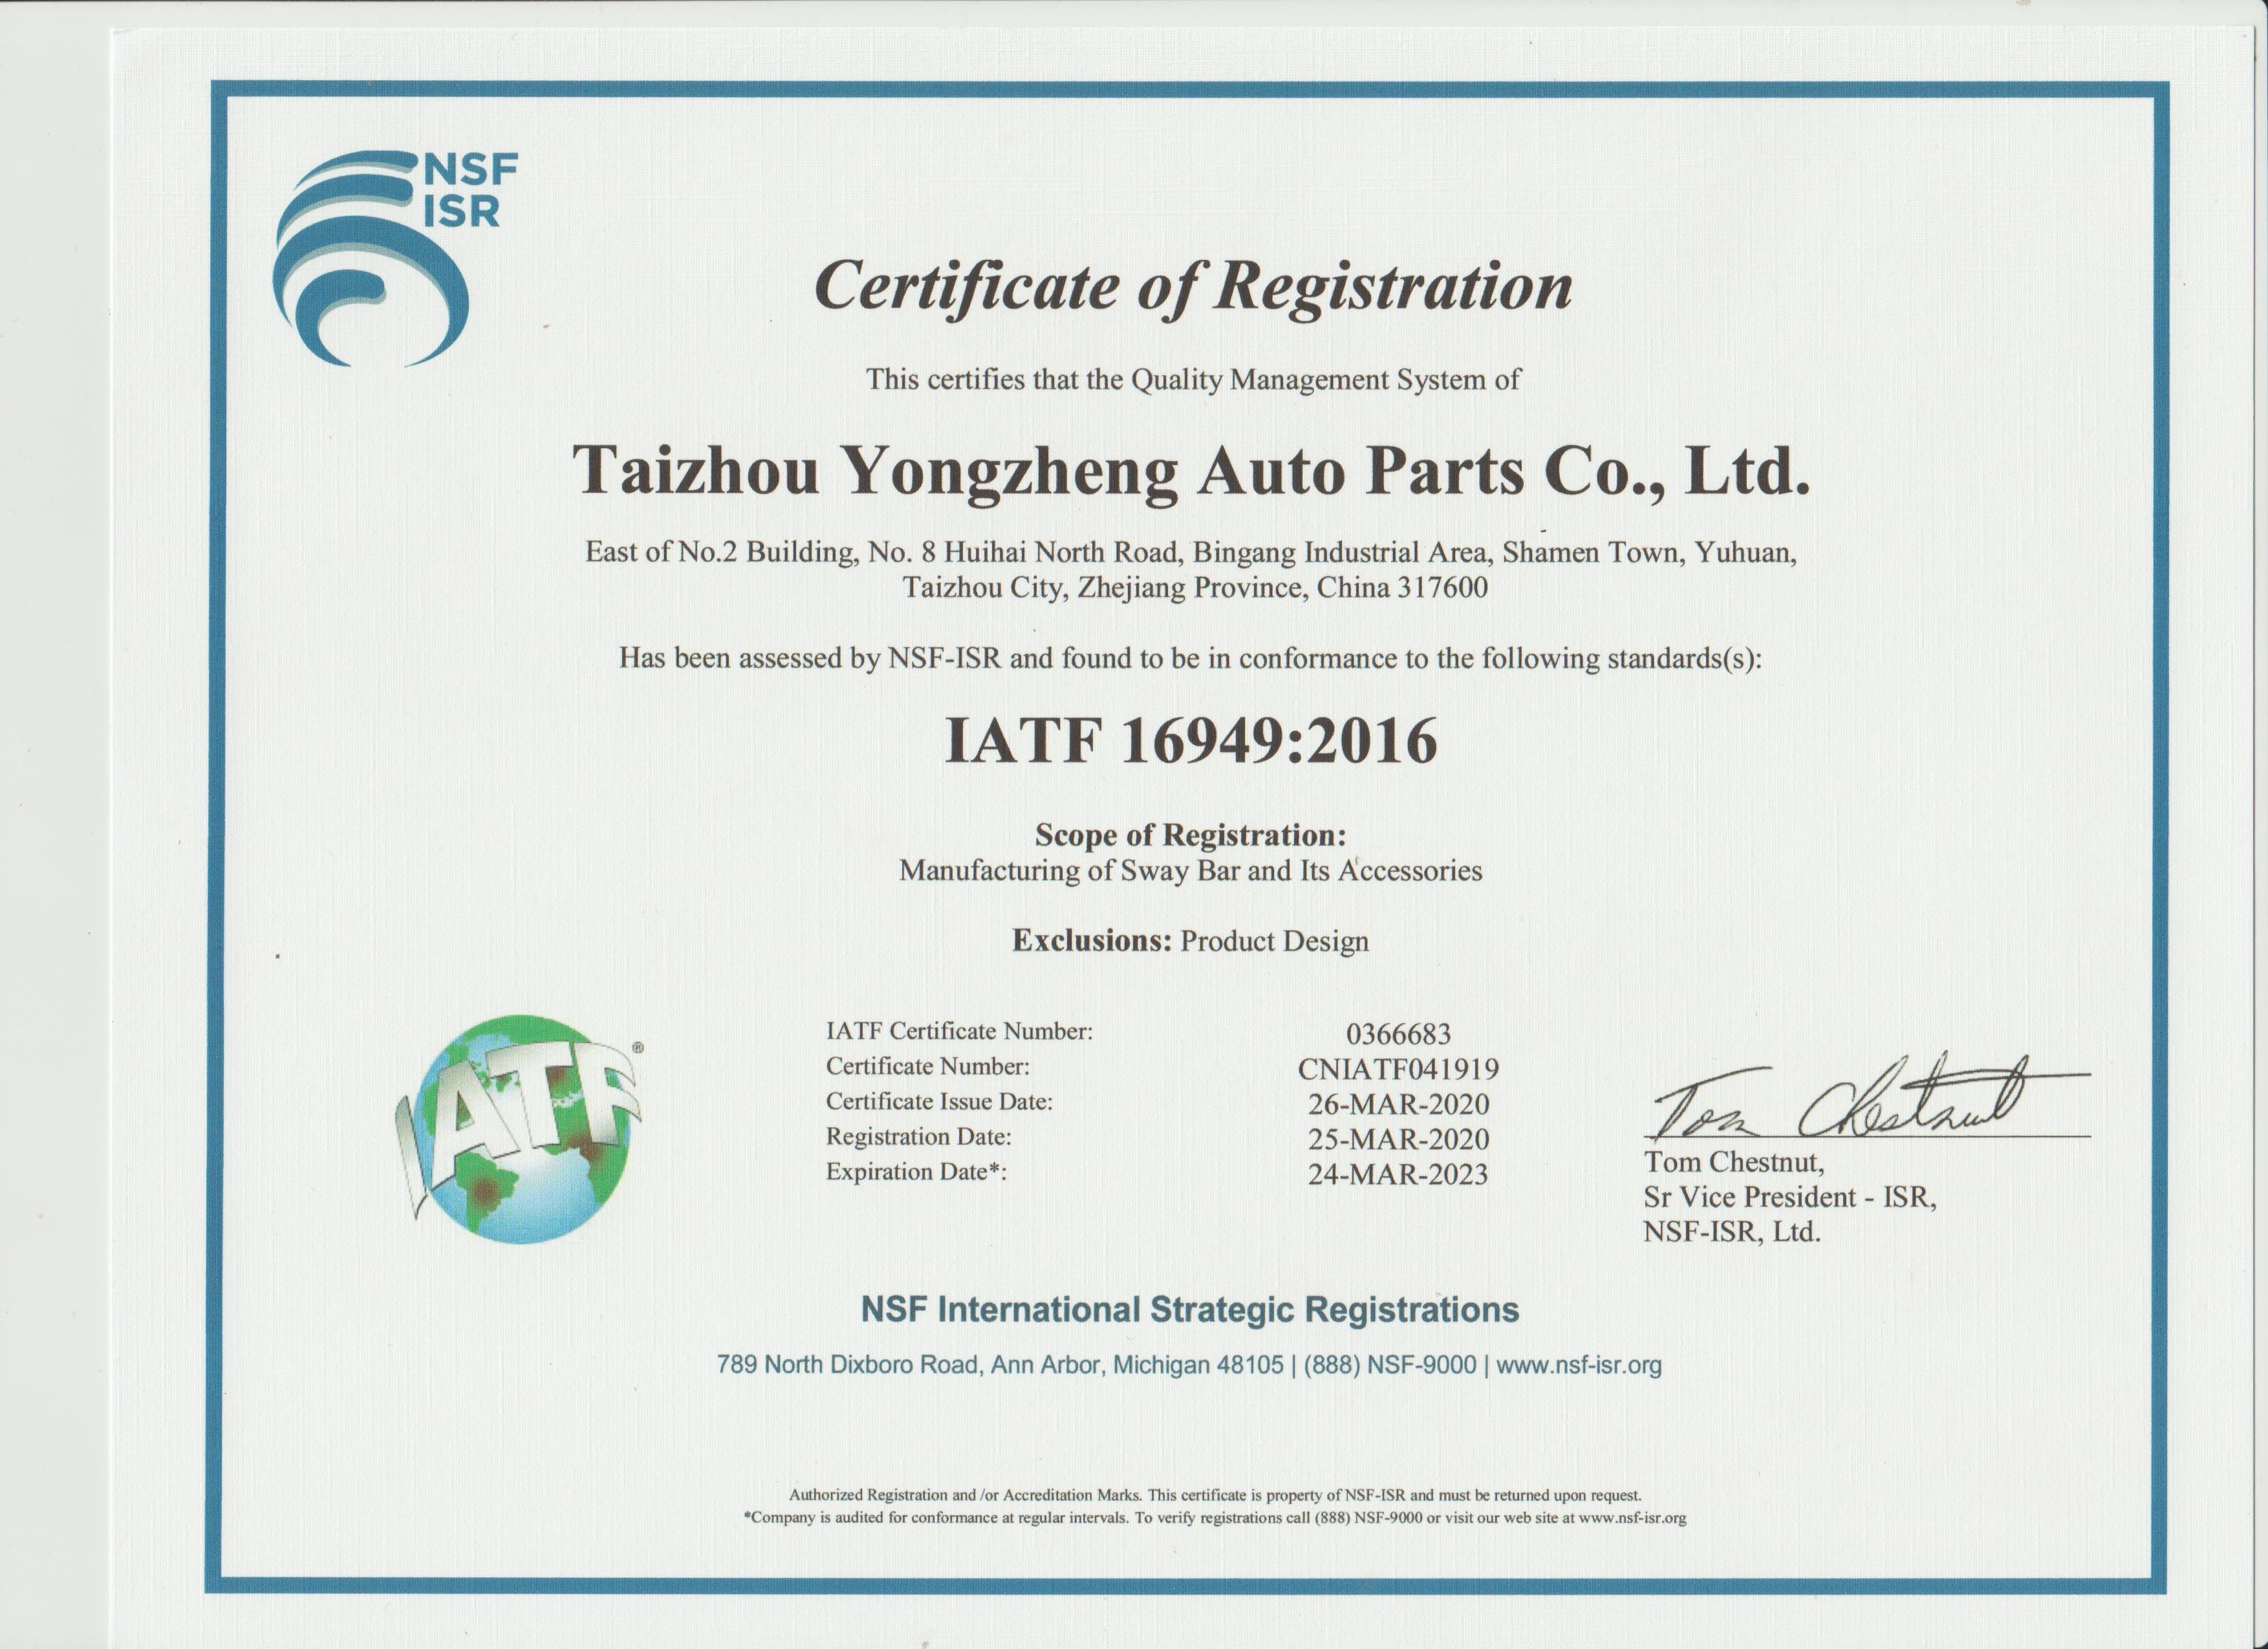 We have obtained the IATF 16949:2016 Certificate